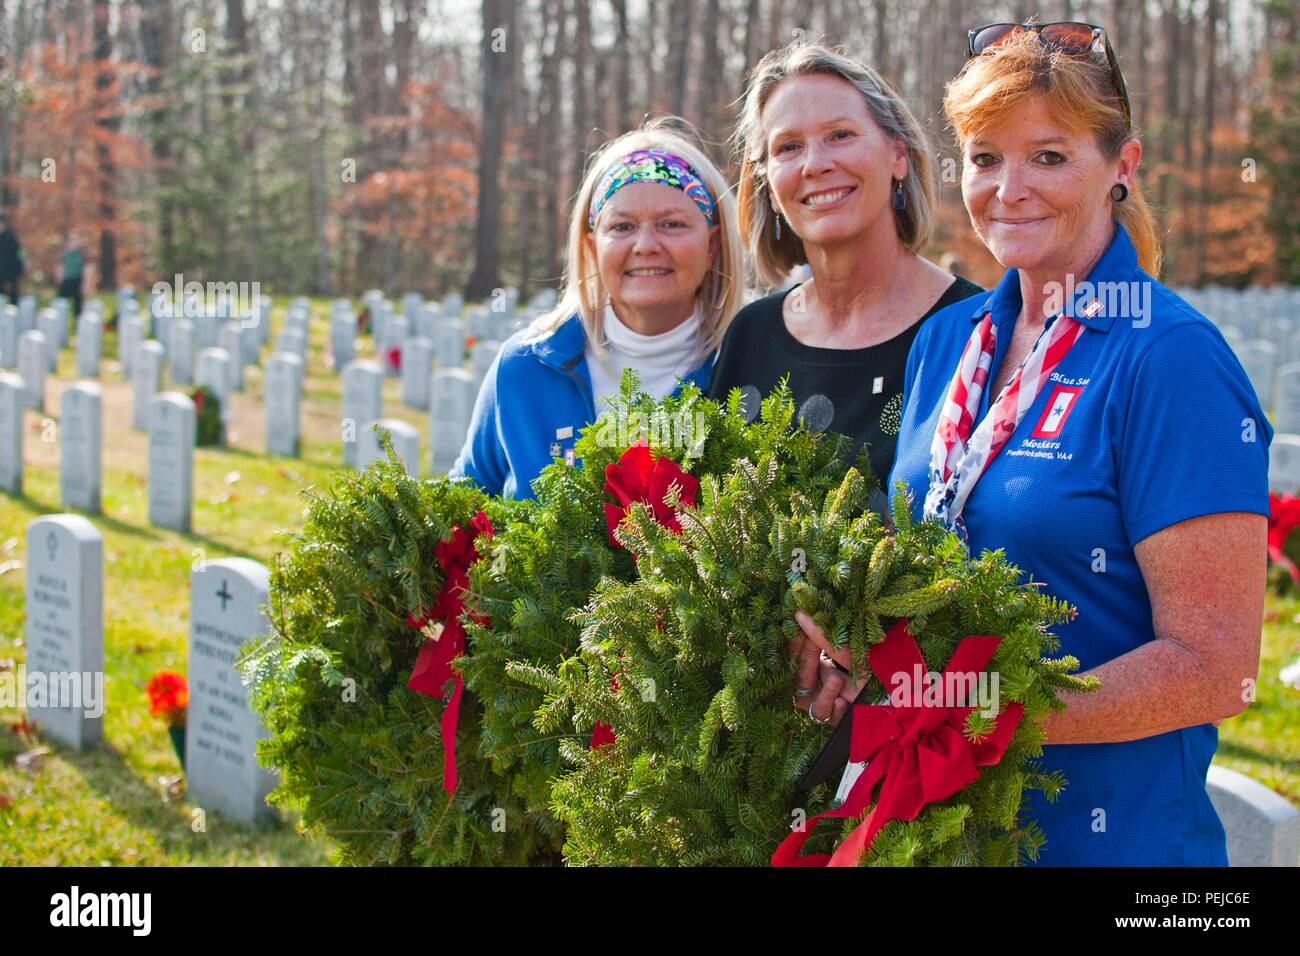 Teri Reece, Blue Star Mothers president, Rhonda Kuebler, Blue Star Mother member, and Sharon Kendall, Blue Star Mother member, participated in the annual Wreaths Across America Dec. 12 at Quantico National Cemetery in Triangle, Va. After seven years, the group continues to support veterans and their families at this annual wreathes across America. In addition to the wreaths, the mothers raise funds to send approximately 400 care packages to deployed troops overseas during the holidays. Stock Photo